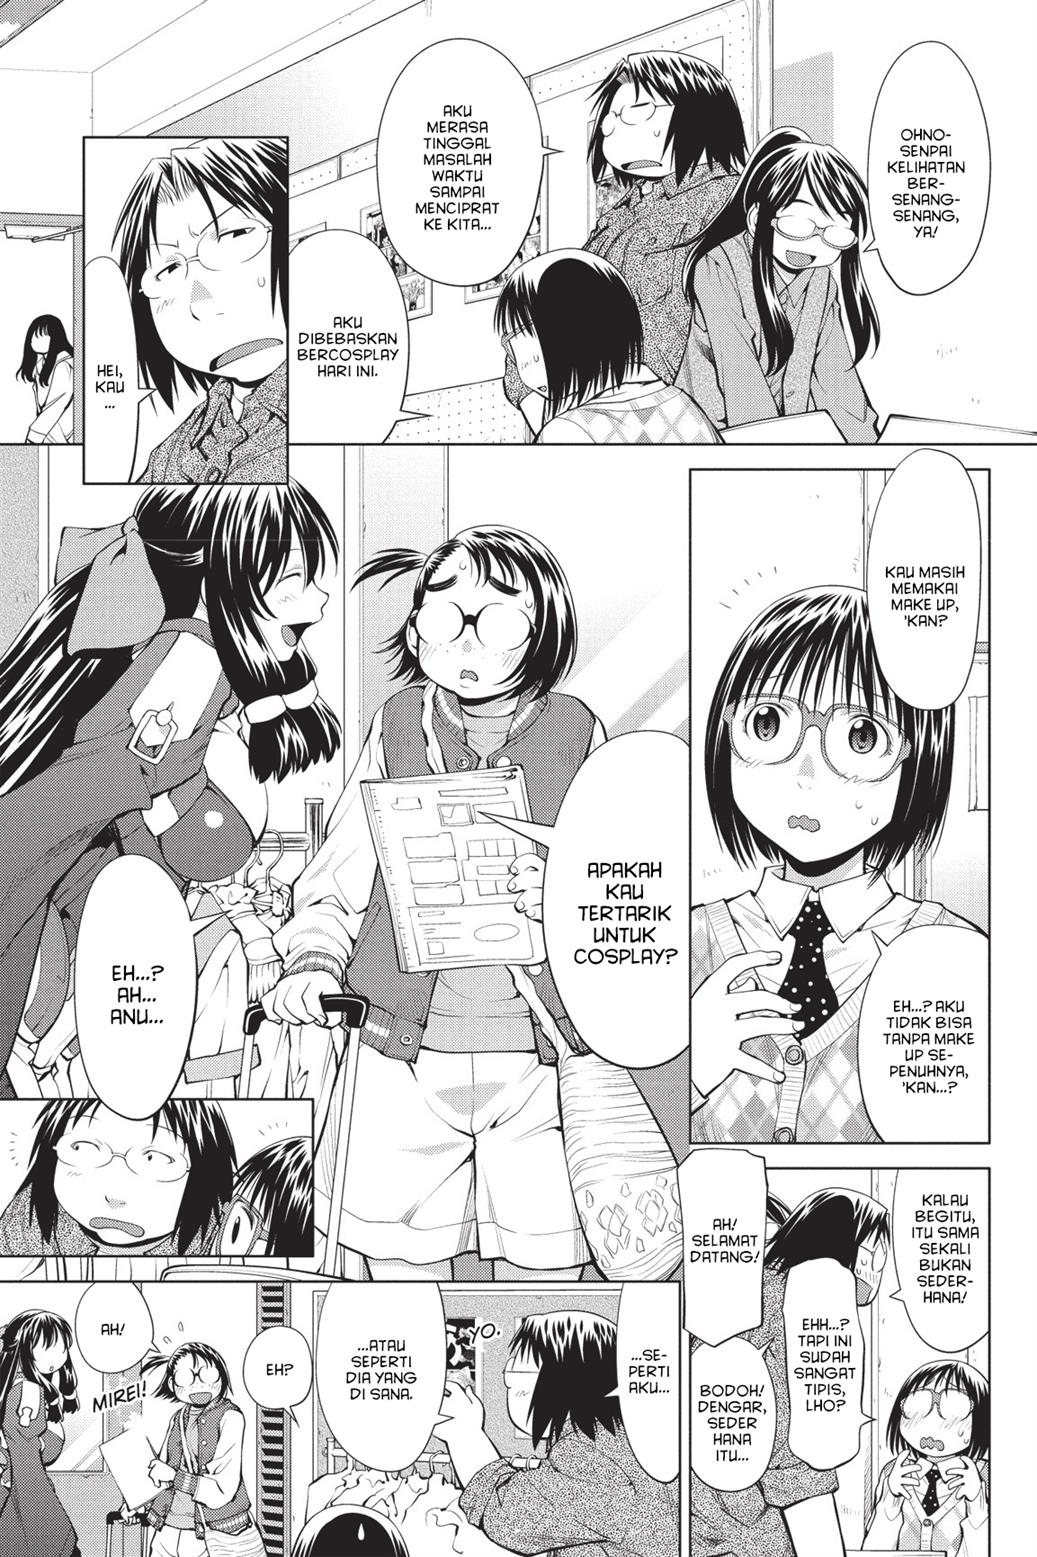 Genshiken – The Society for the Study of Modern Visual Culture Chapter 75 Image 3